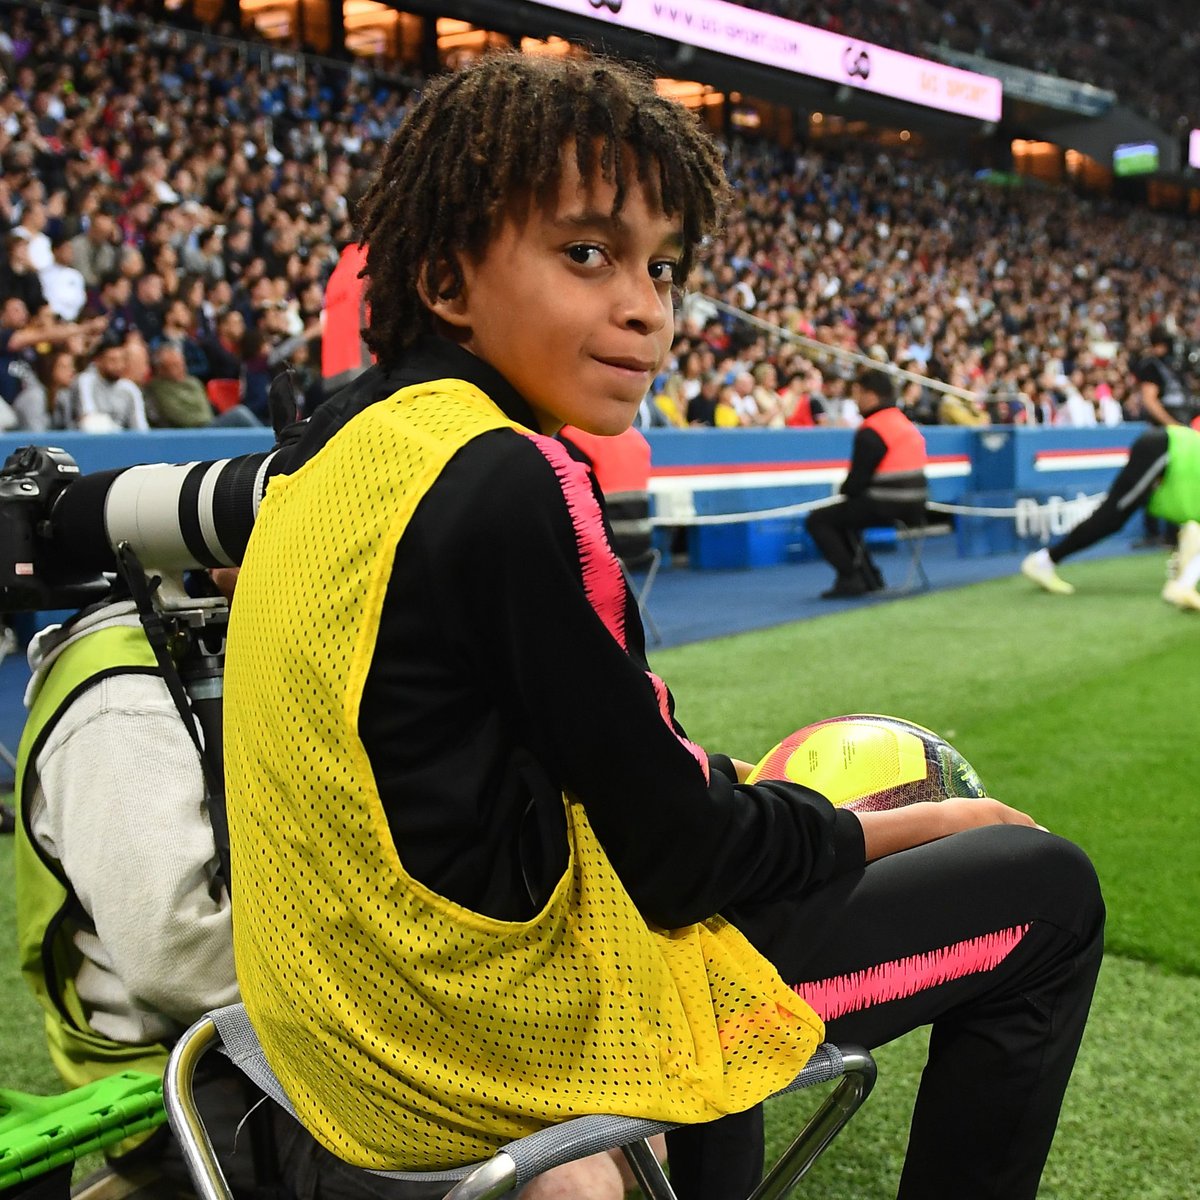 Ethan Mbappé - Real Madrid Mbappe Junior In Spanish Capital With Psg As Com : 13 years old ethan mbappé for paris saint germain u13.